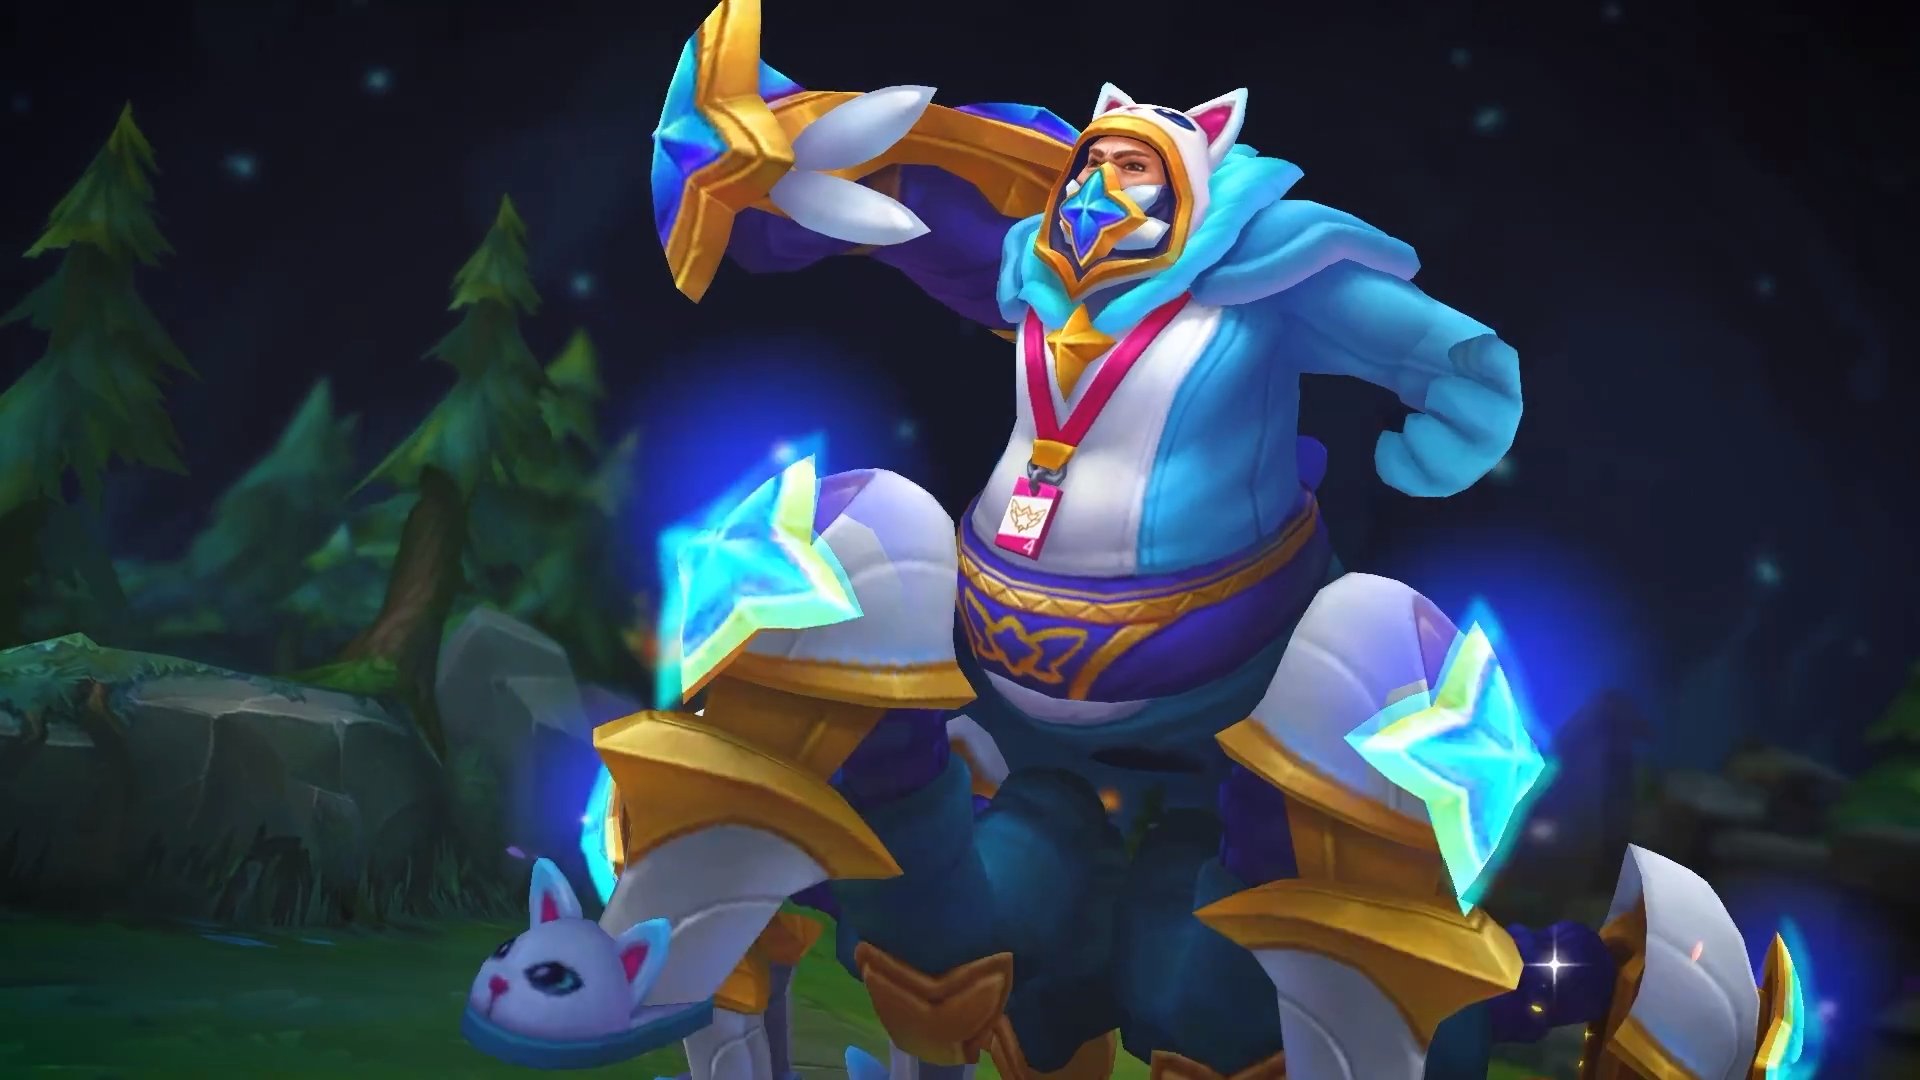 One of League of Legends’ oldest memes comes to life with new Pajama Guardian Urgot skin